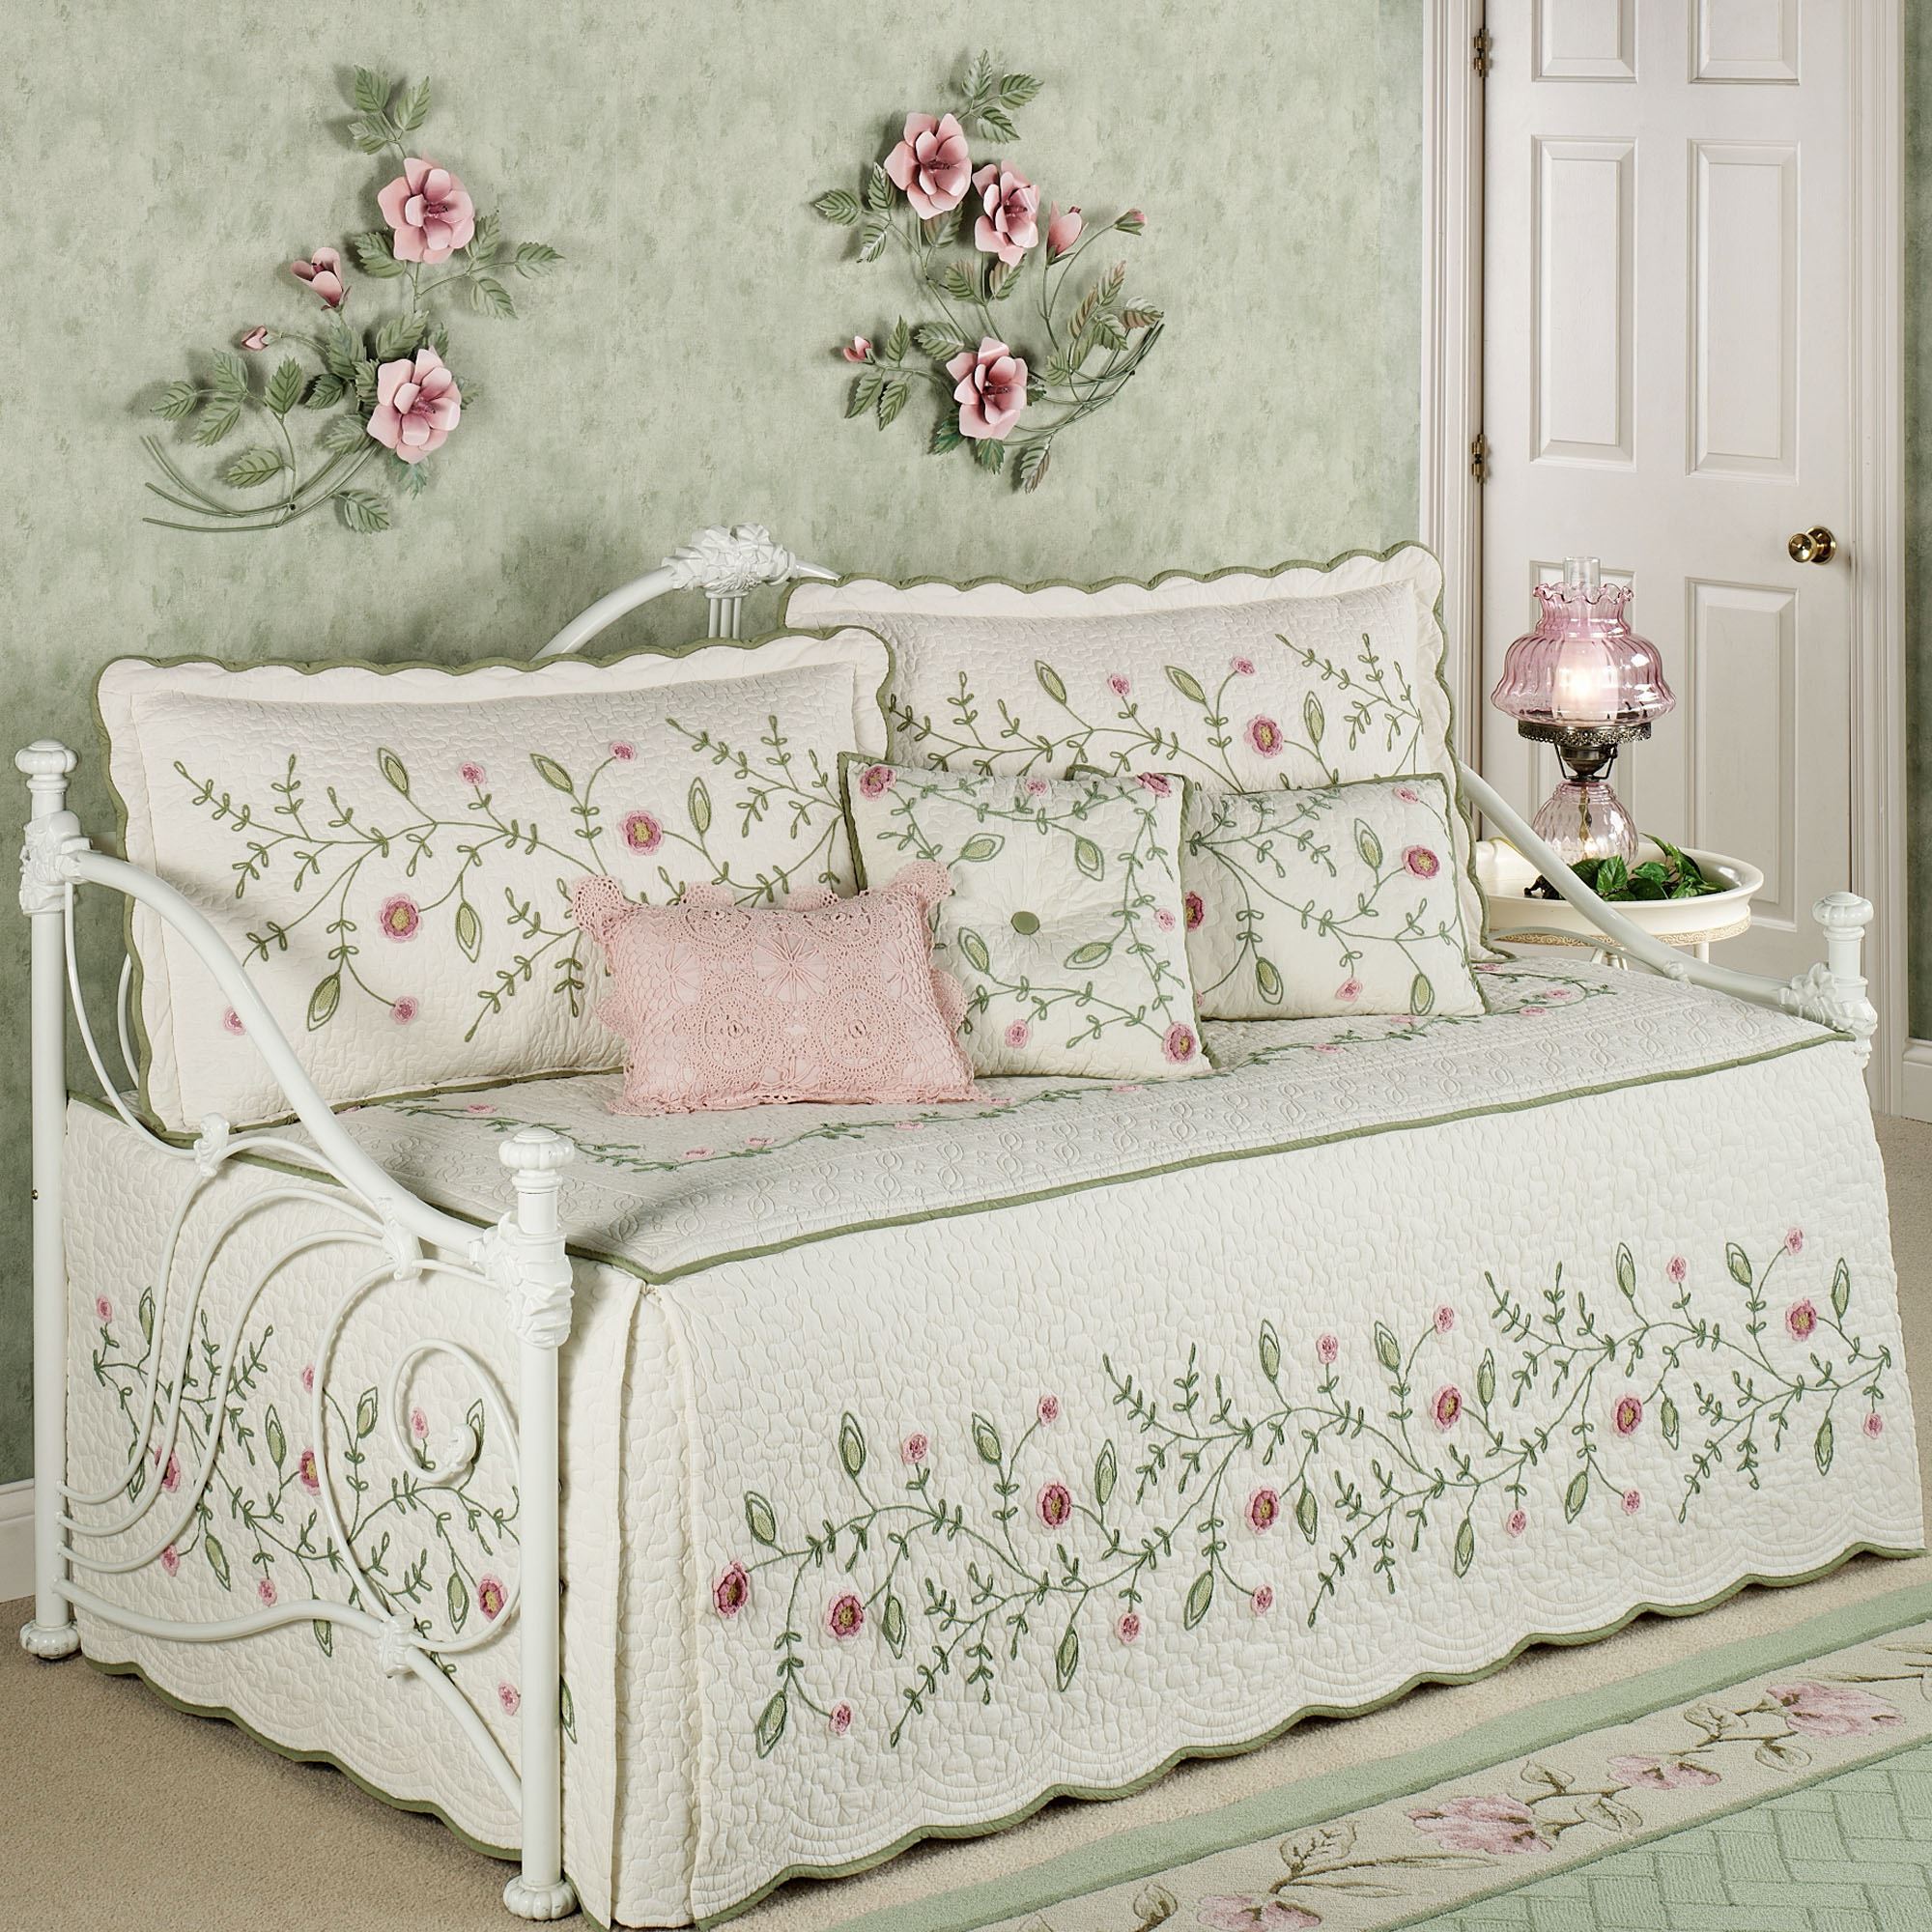 floral daybed bedding sets photo - 7